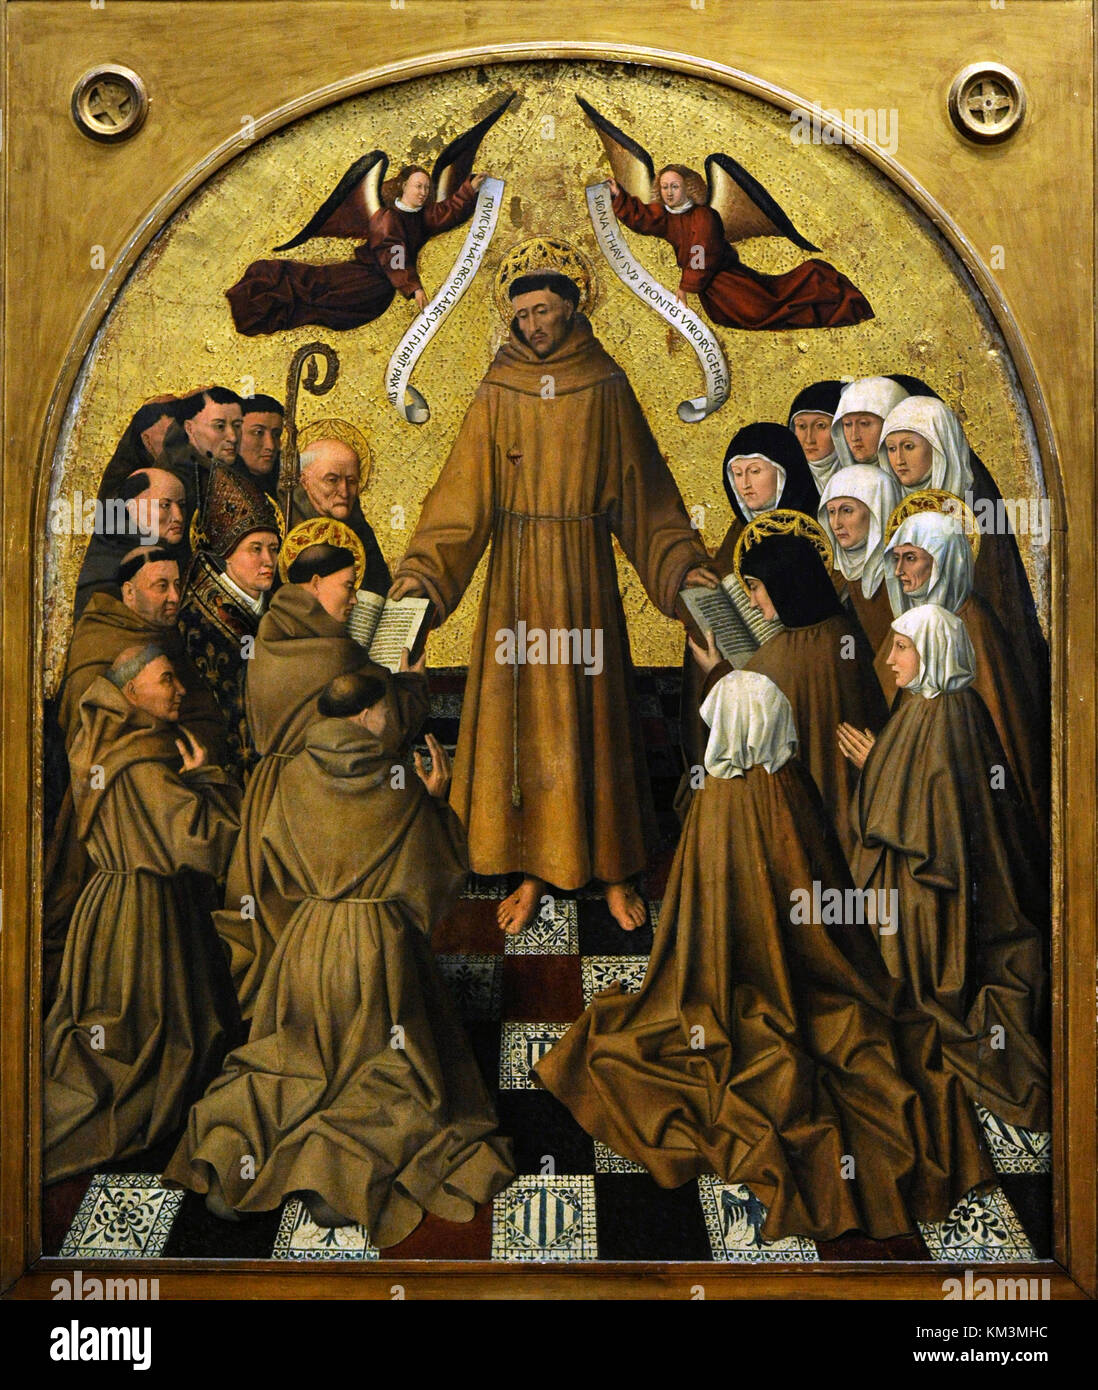 Saint Francis of Assisi (Giovanni di Pietro Bernardone) (1182-1226). Founder of the Franciscan Order. Saint Francis delivers the rule, around 1445. Painting by Colantonio (1440-1470). Bourbon Collection. National Museum of Capodimonte. Naples. Italy. Stock Photo